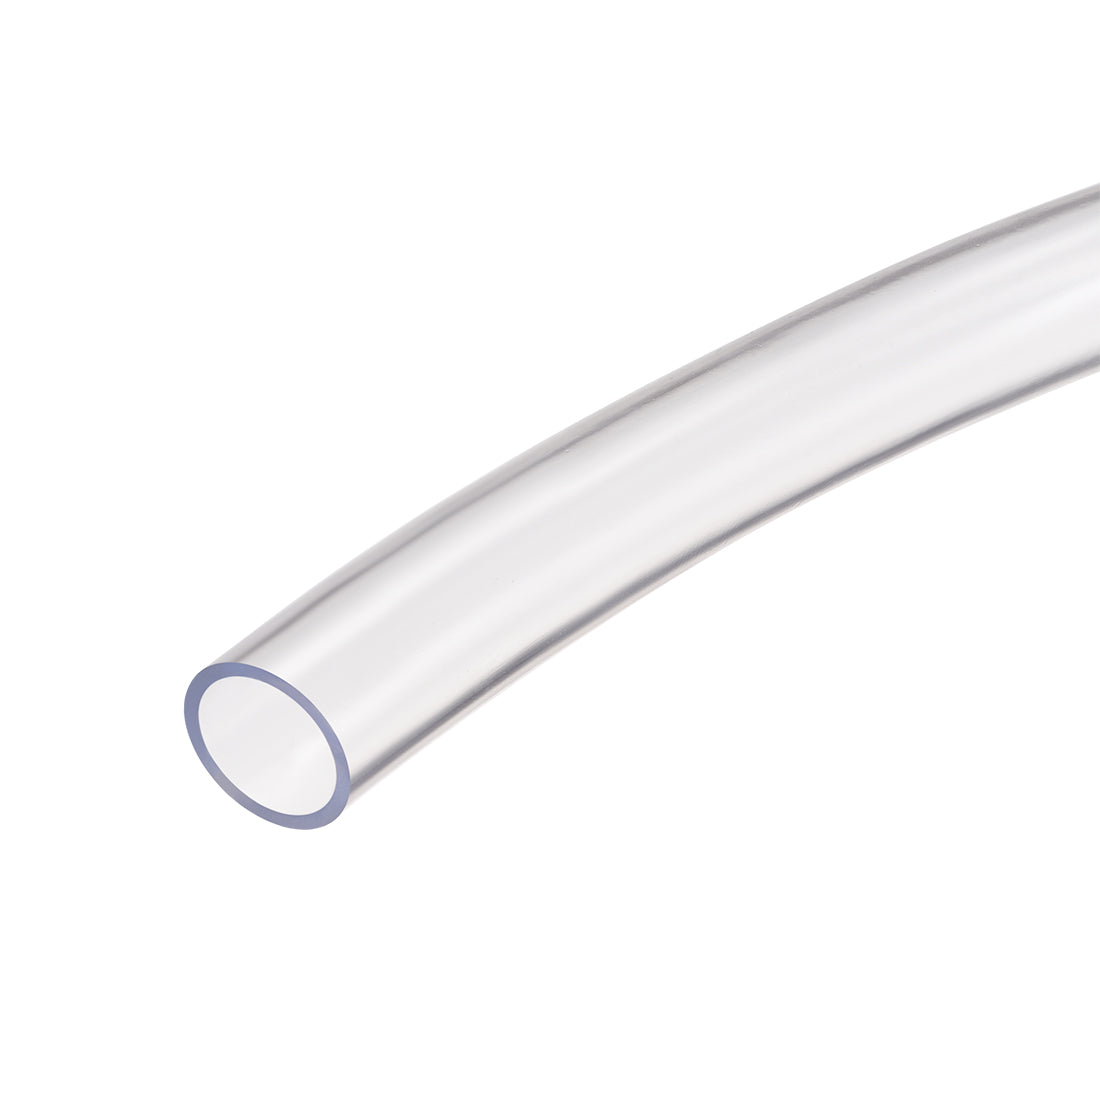 uxcell Uxcell PVC Clear Vinly Tubing,16mm ID x 19mm OD,4m,Plastic Flexible Hose Tube,Flex Pipe for Water,Beverage Pump